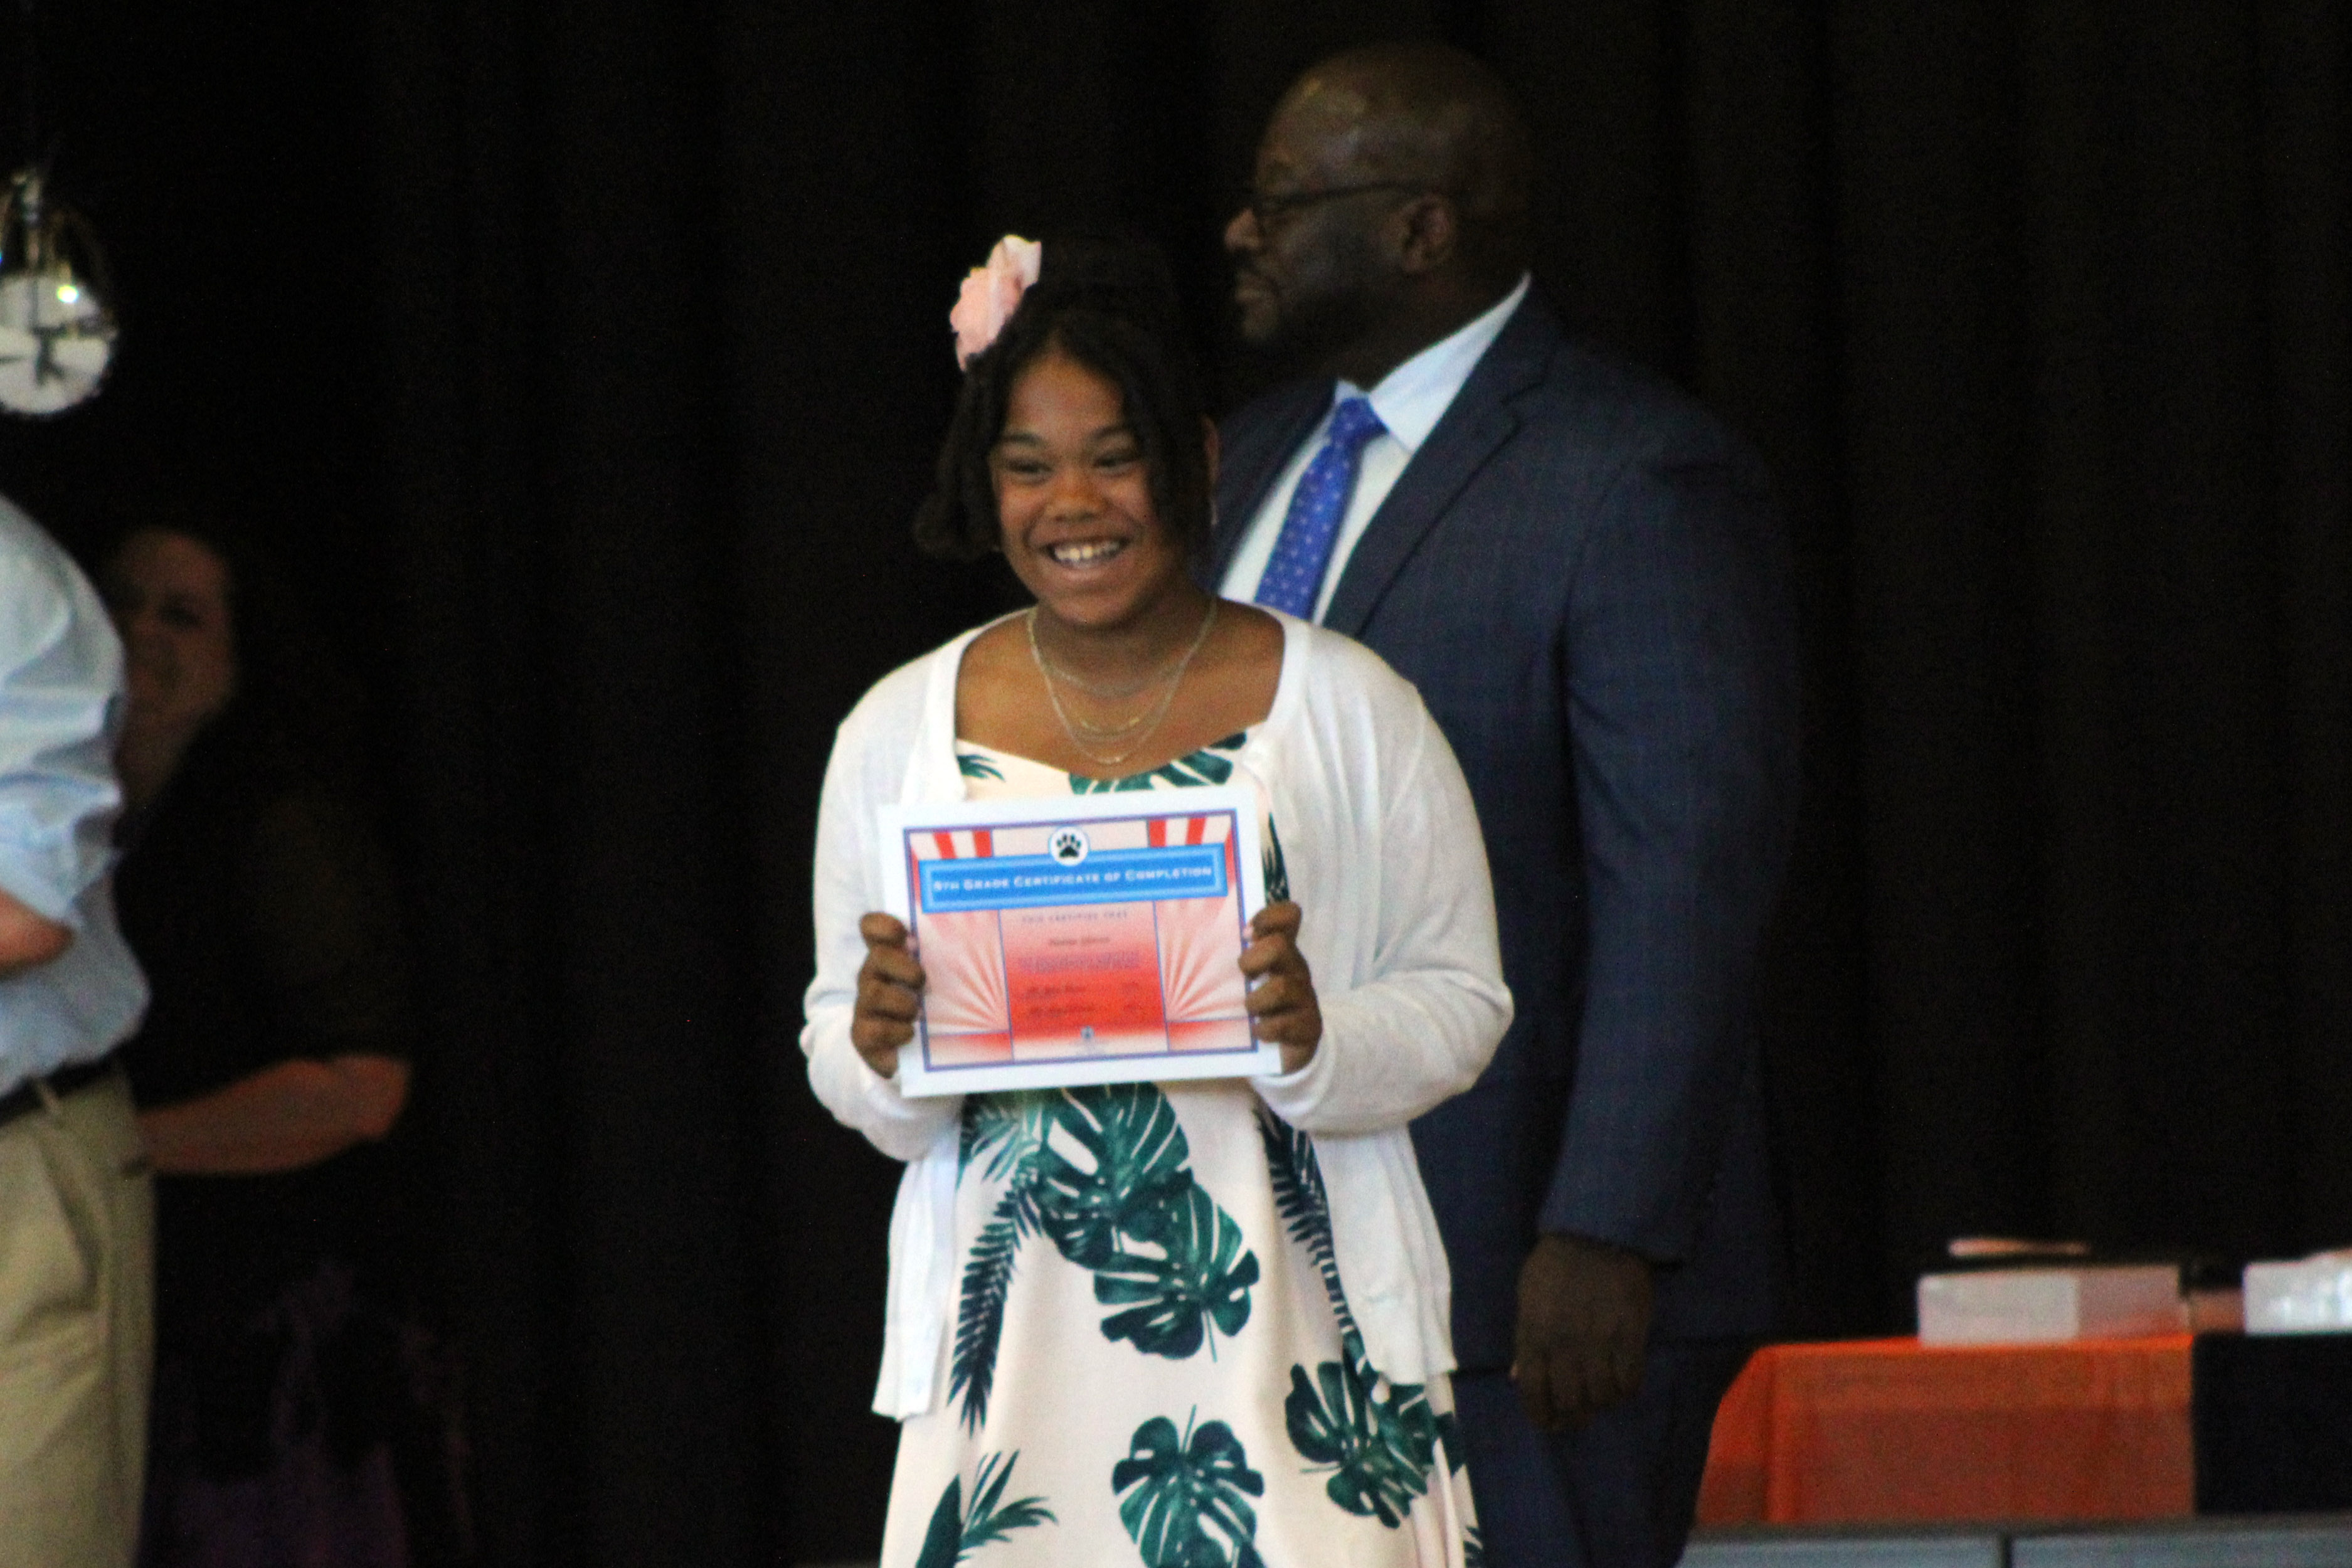 girl smiles as sheholds up certificate